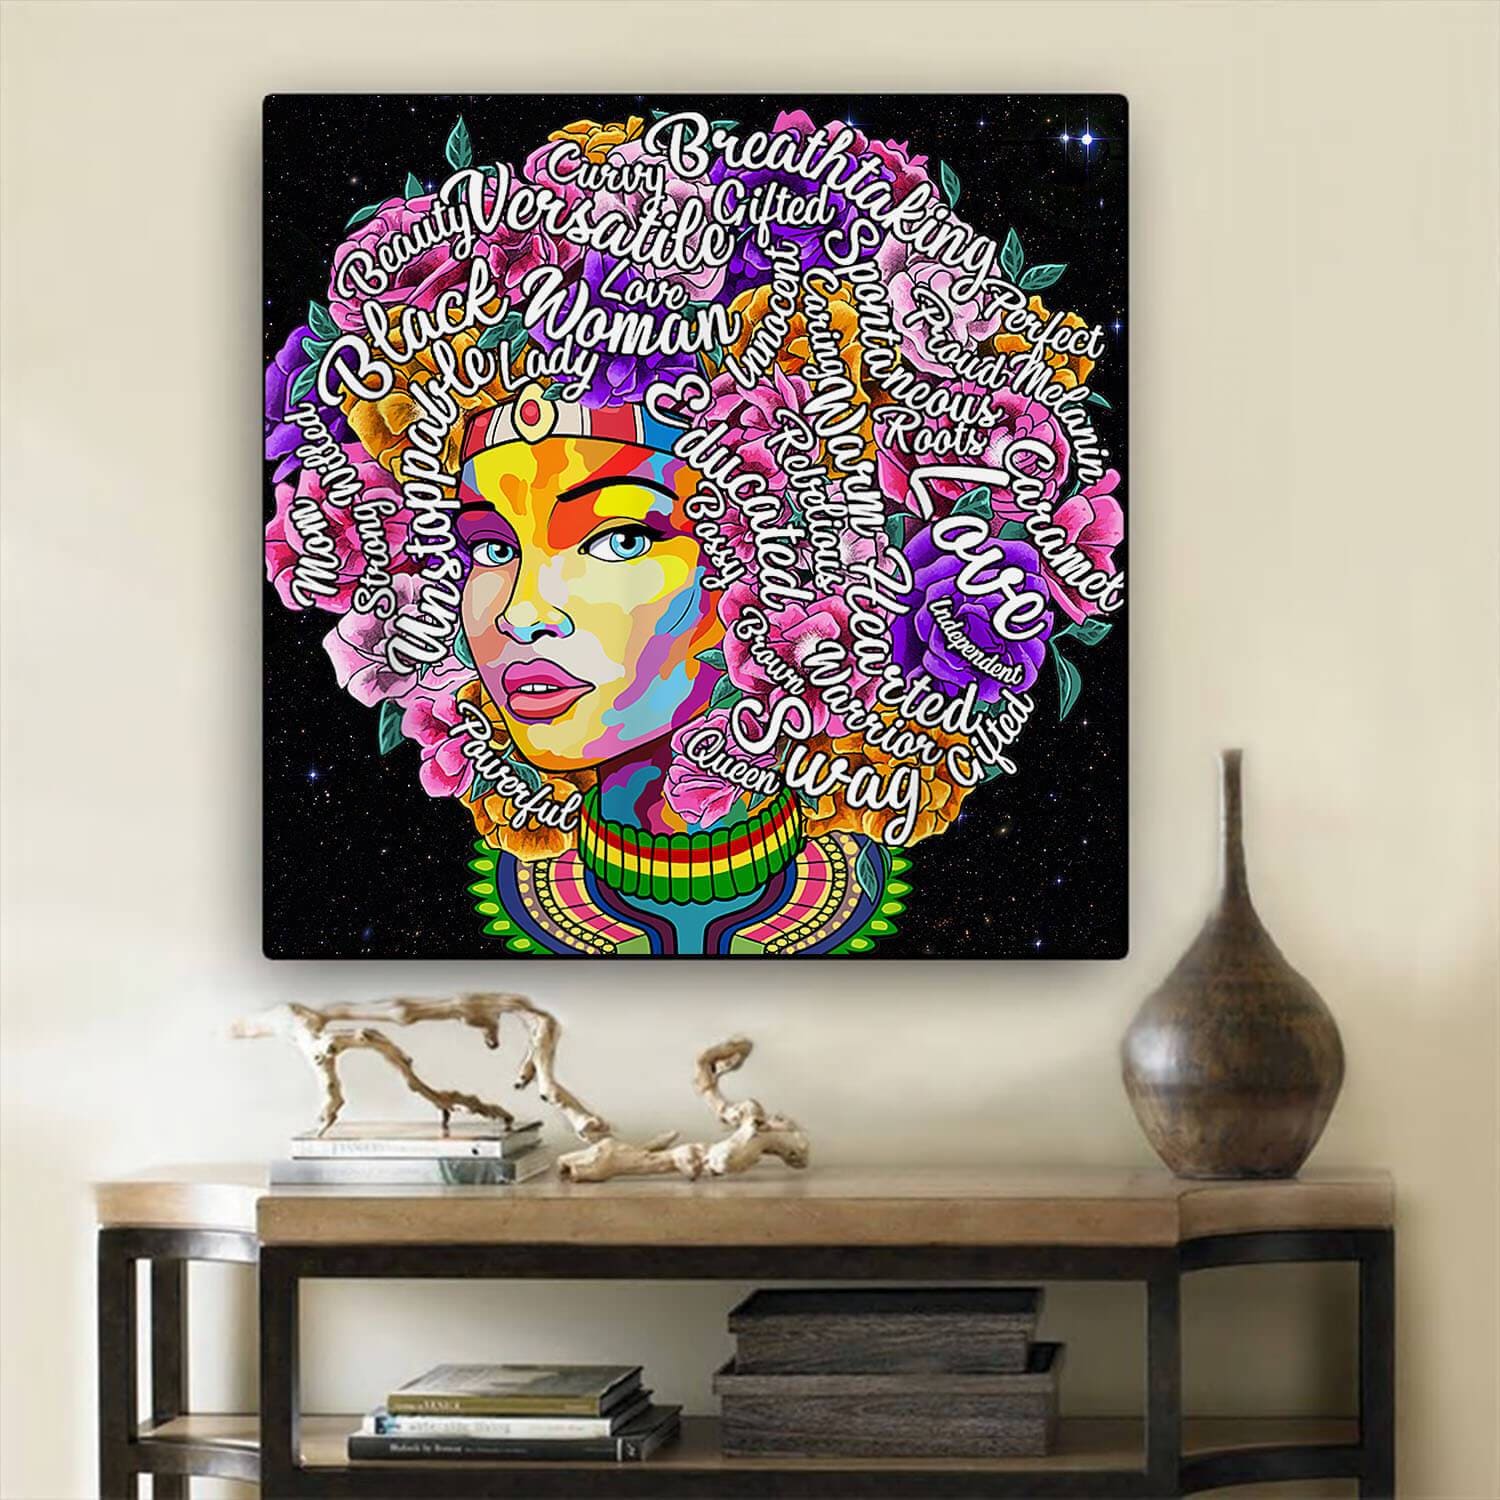 Black Art Paintings for Wall Decorations Afro African American Black Woman  Portrait Canvas Wall Art Prints Artwork Inspirational Quotes Wall Decor for